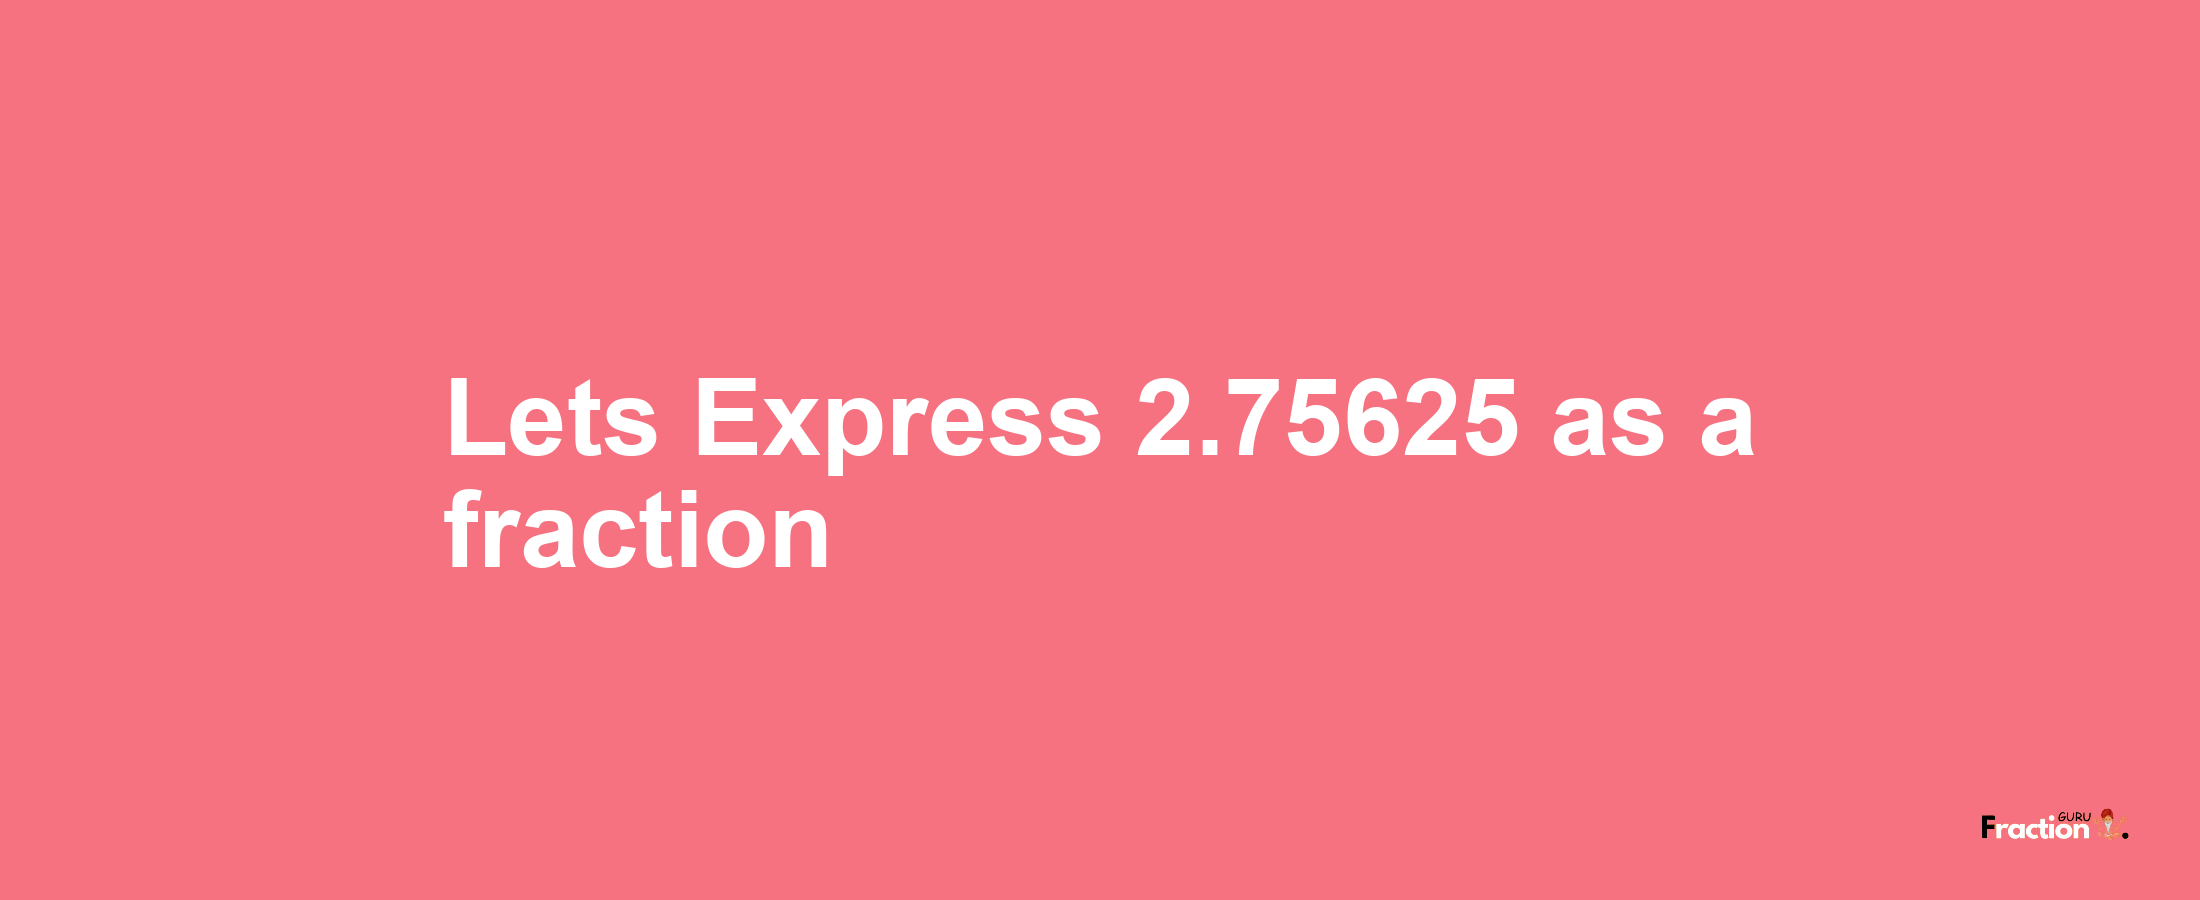 Lets Express 2.75625 as afraction